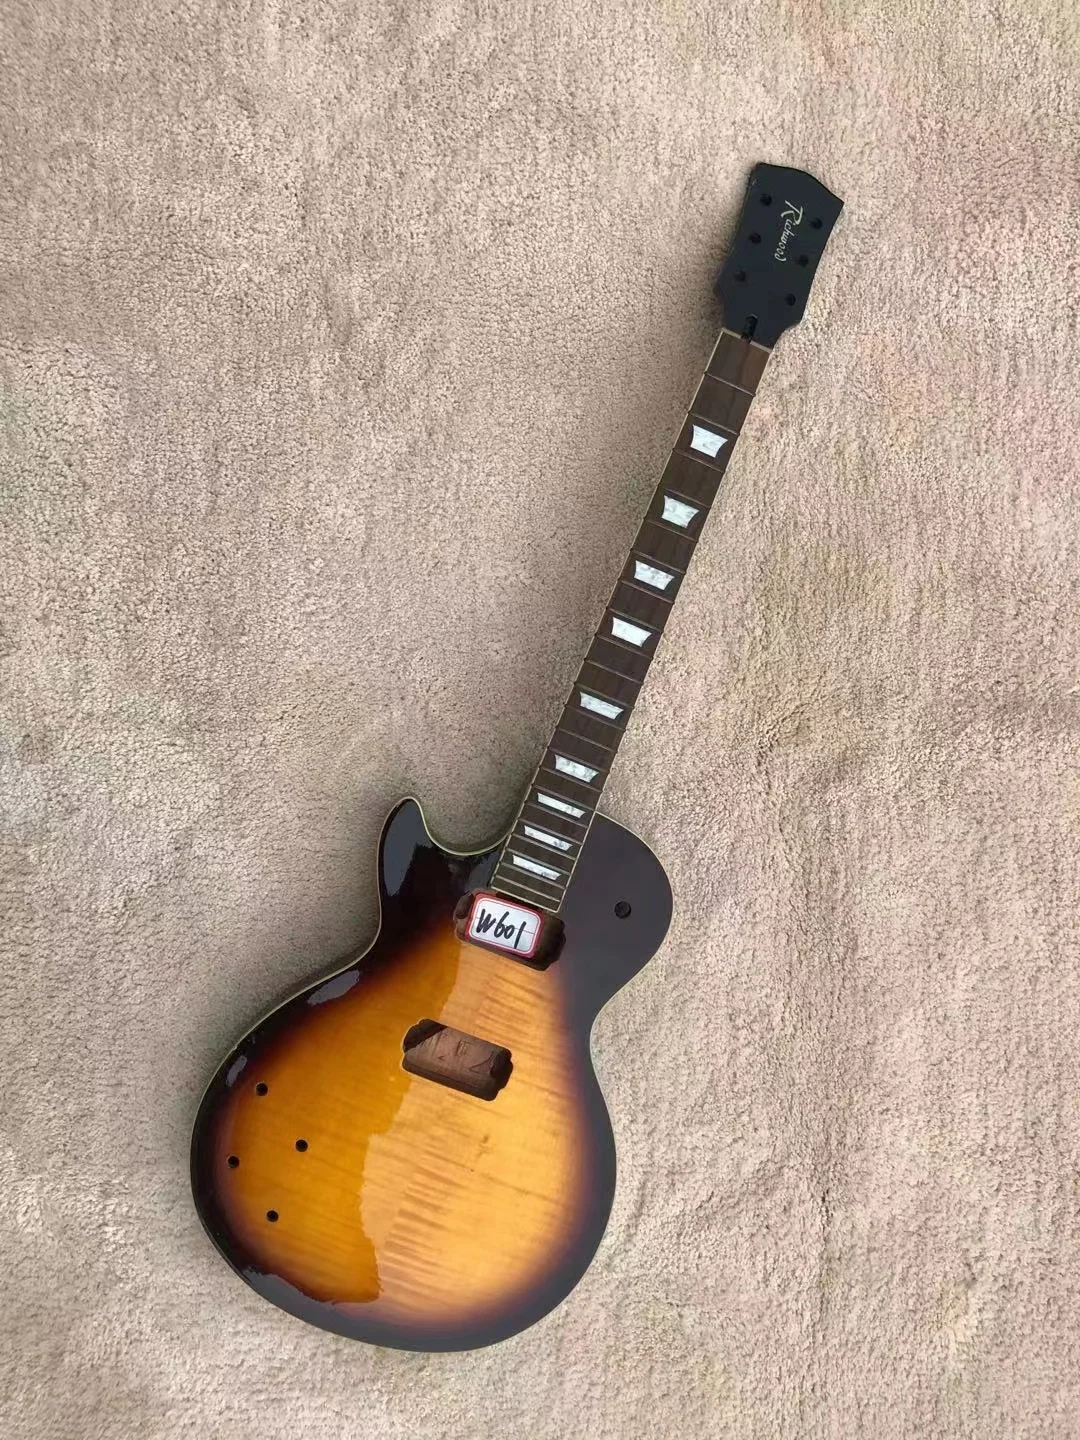 DIY (Not New) Left Handed Custom Electric Guitar Tiger / Flame Maple Top without Hardwares in Stock Discount Free Shipping W601